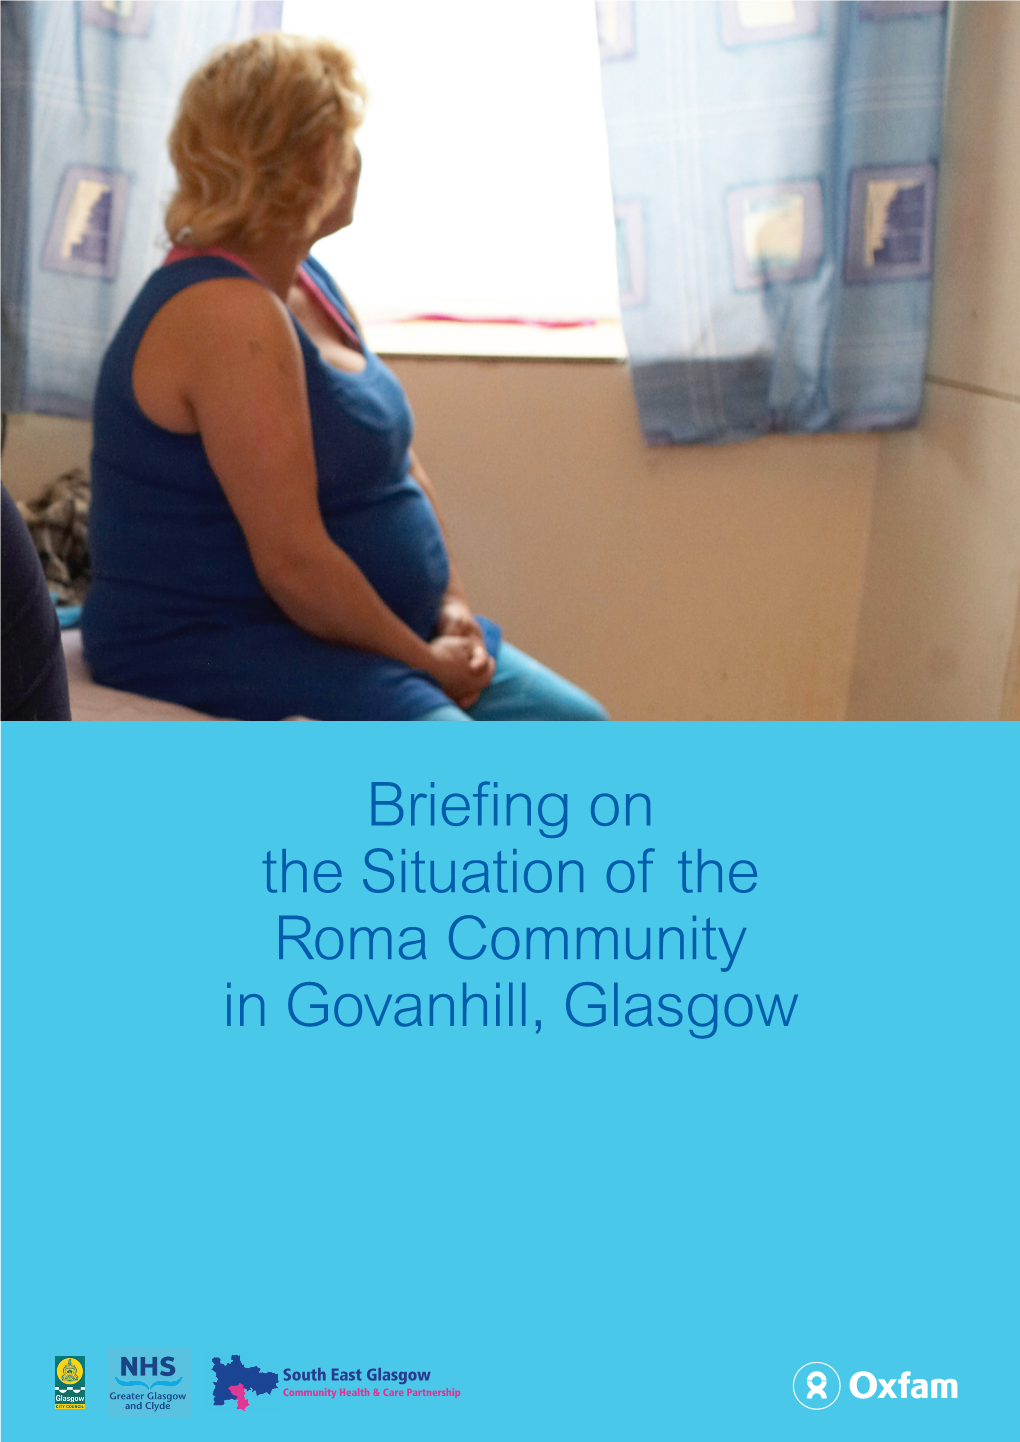 Briefing on the Situation of the Roma Community in Govanhill, Glasgow